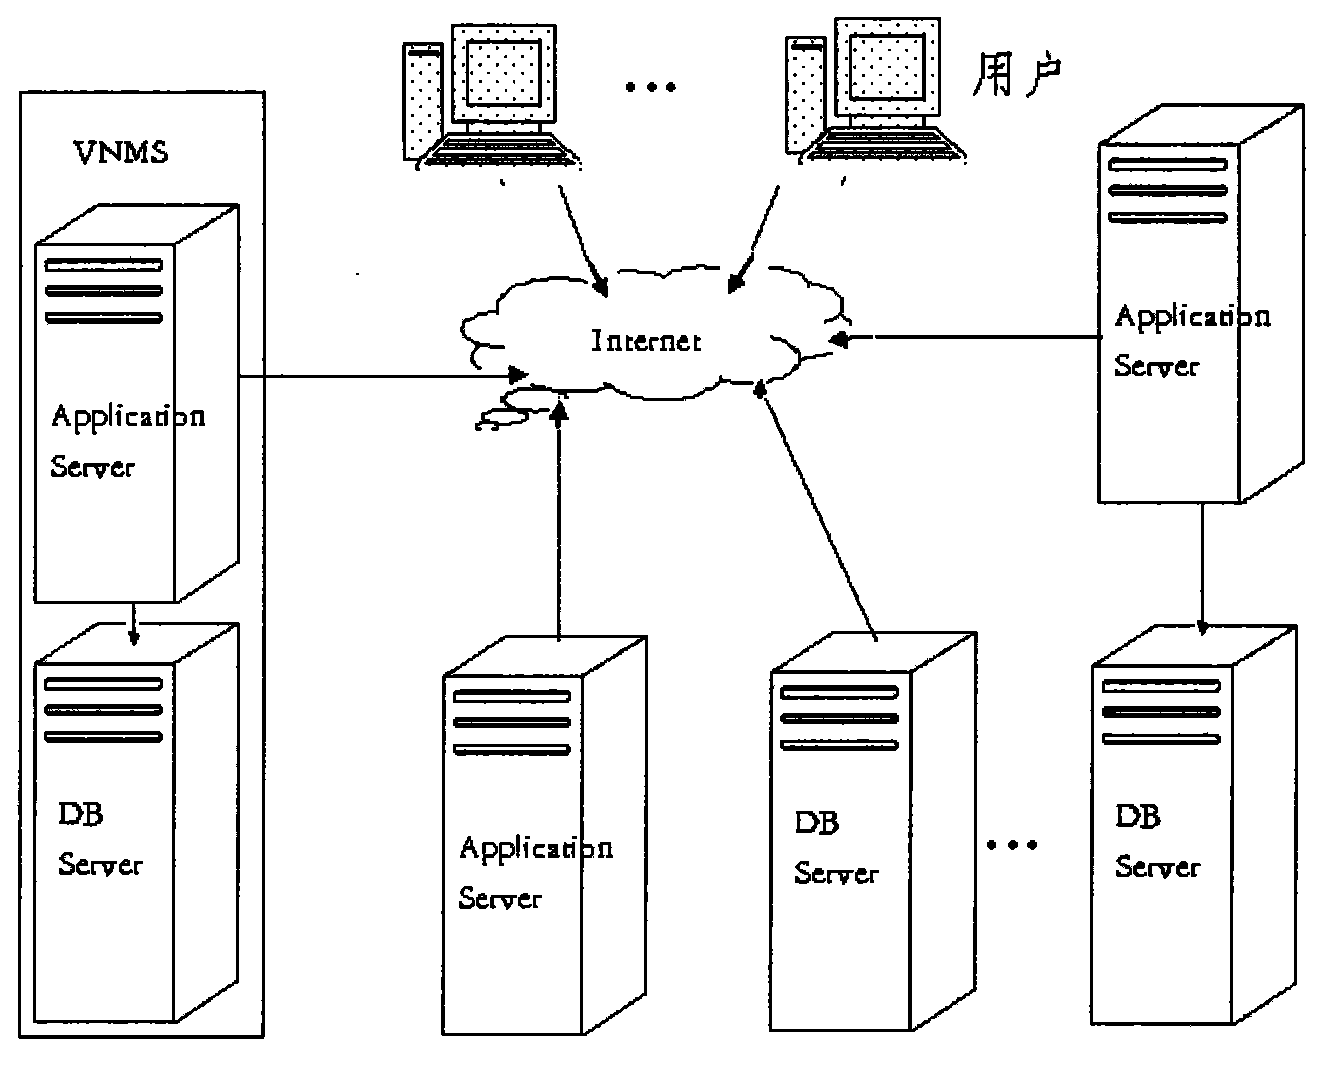 A VNMS system supporting a dynamic structured application platform